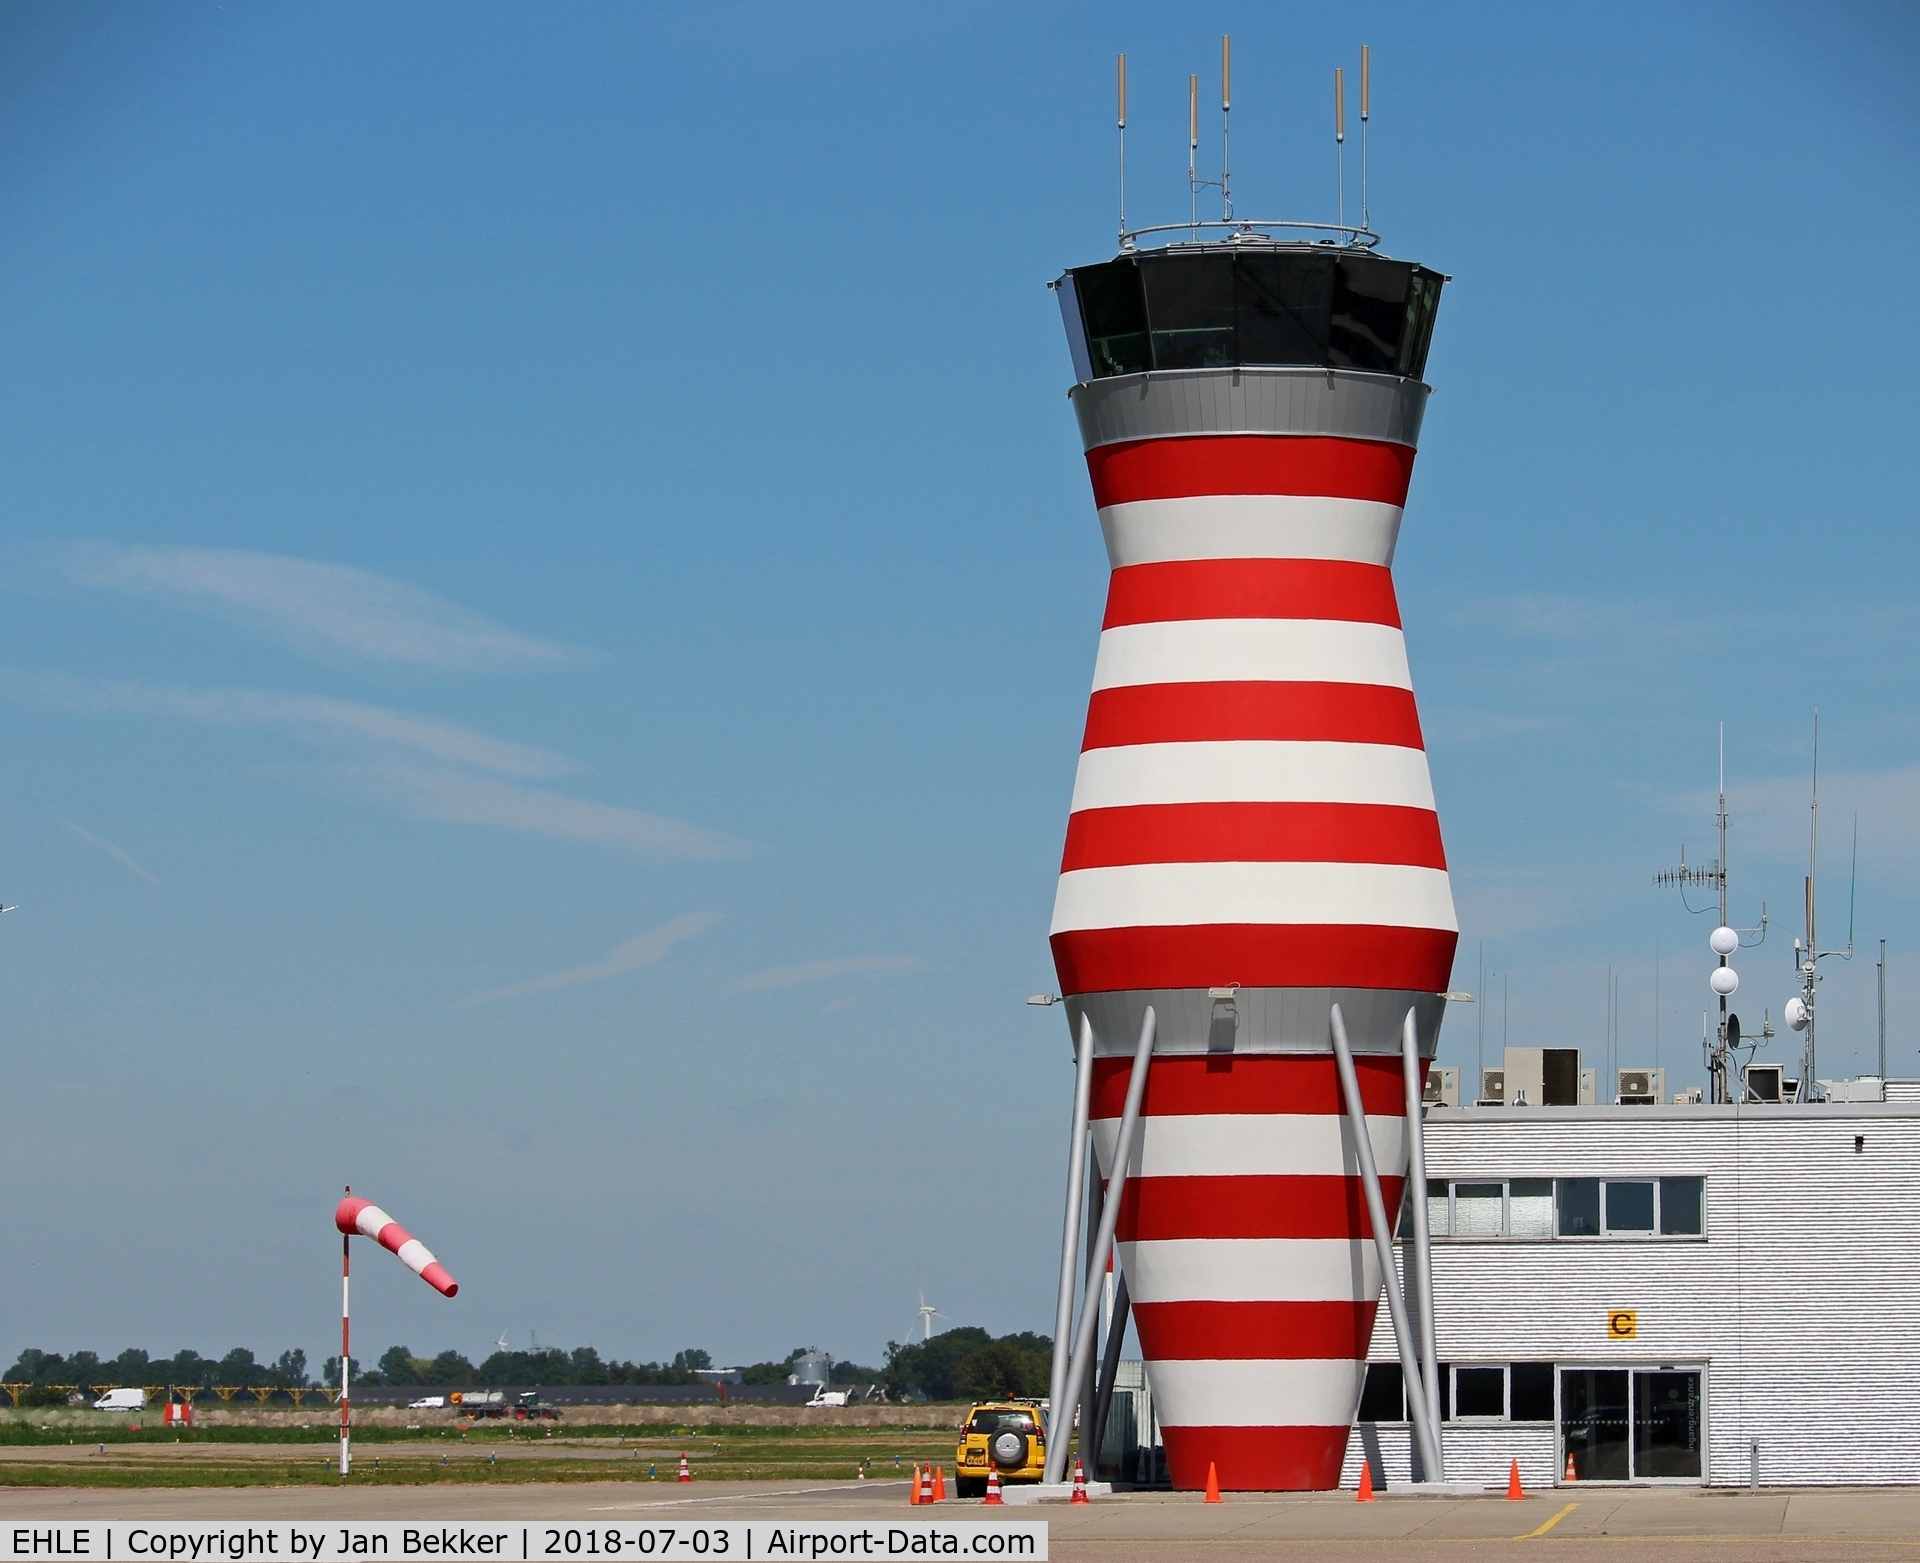 Lelystad Airport, Lelystad Netherlands (EHLE) - The new Airtraffic Control Tower is just finished now